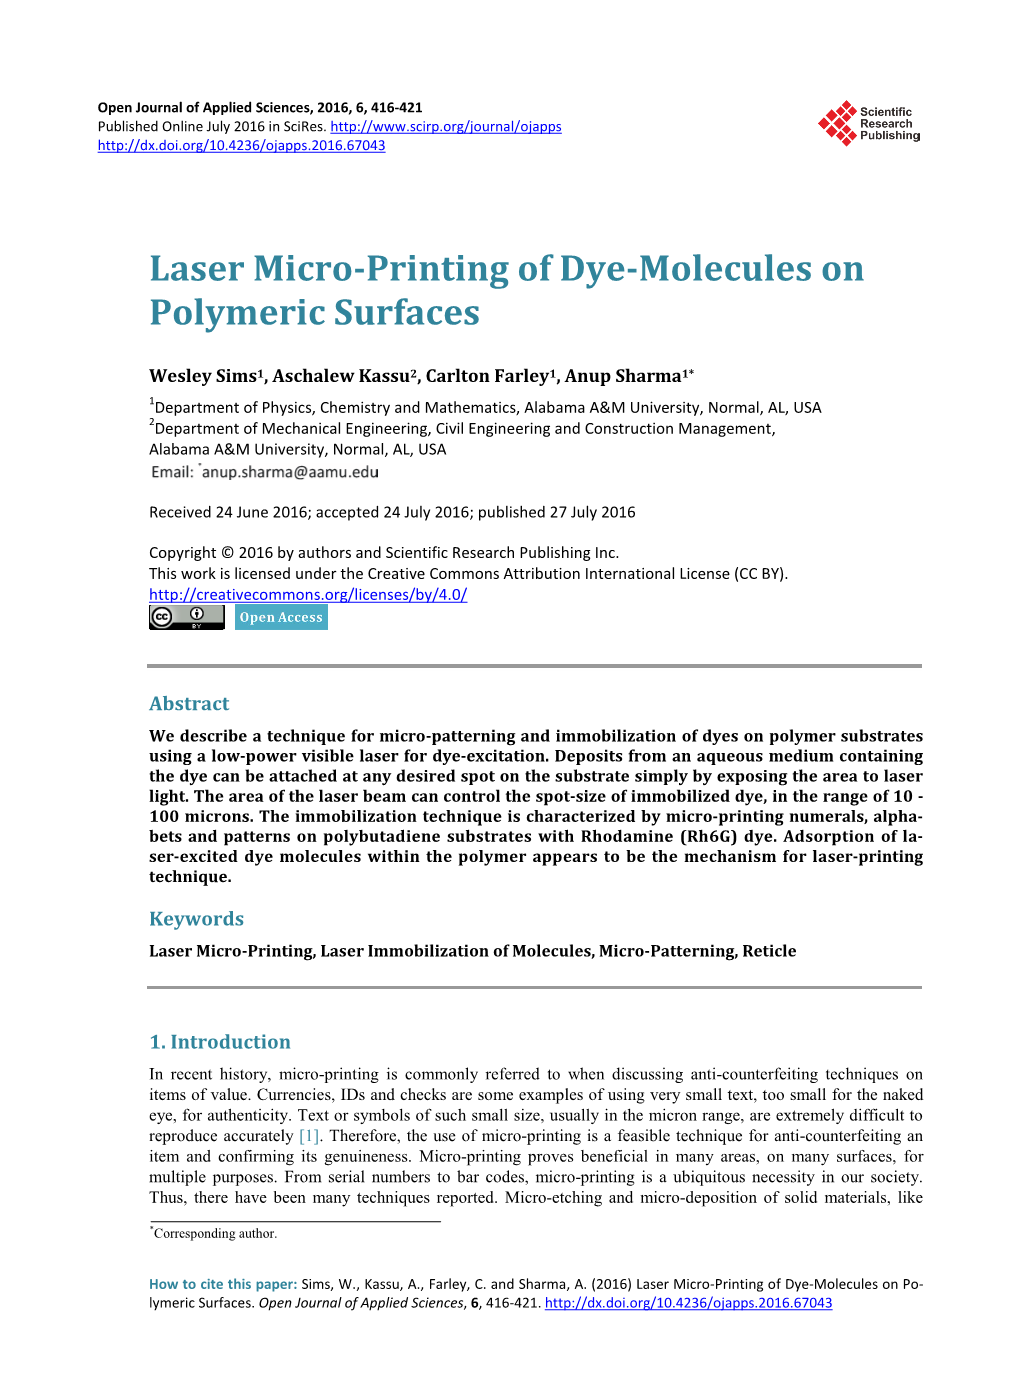 Laser Micro-Printing of Dye-Molecules on Polymeric Surfaces